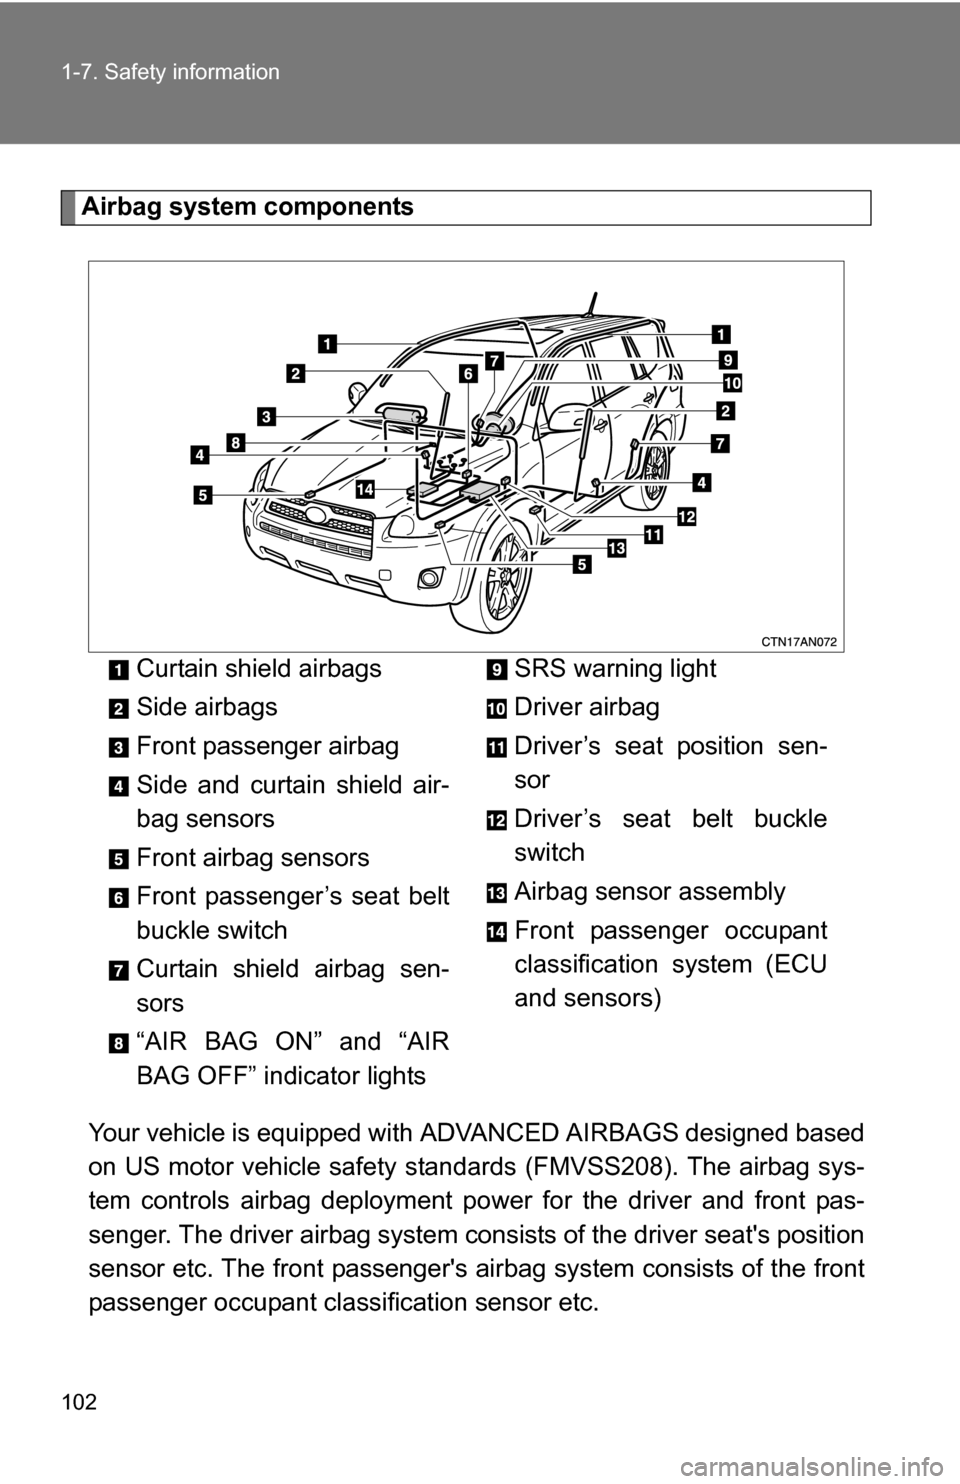 TOYOTA RAV4 2012 XA30 / 3.G Owners Manual 102 1-7. Safety information
Airbag system componentsYour vehicle is equipped with  ADVANCED AIRBAGS designed based
on US motor vehicle safety standards (FMVSS208). The airbag sys-
tem controls airbag 